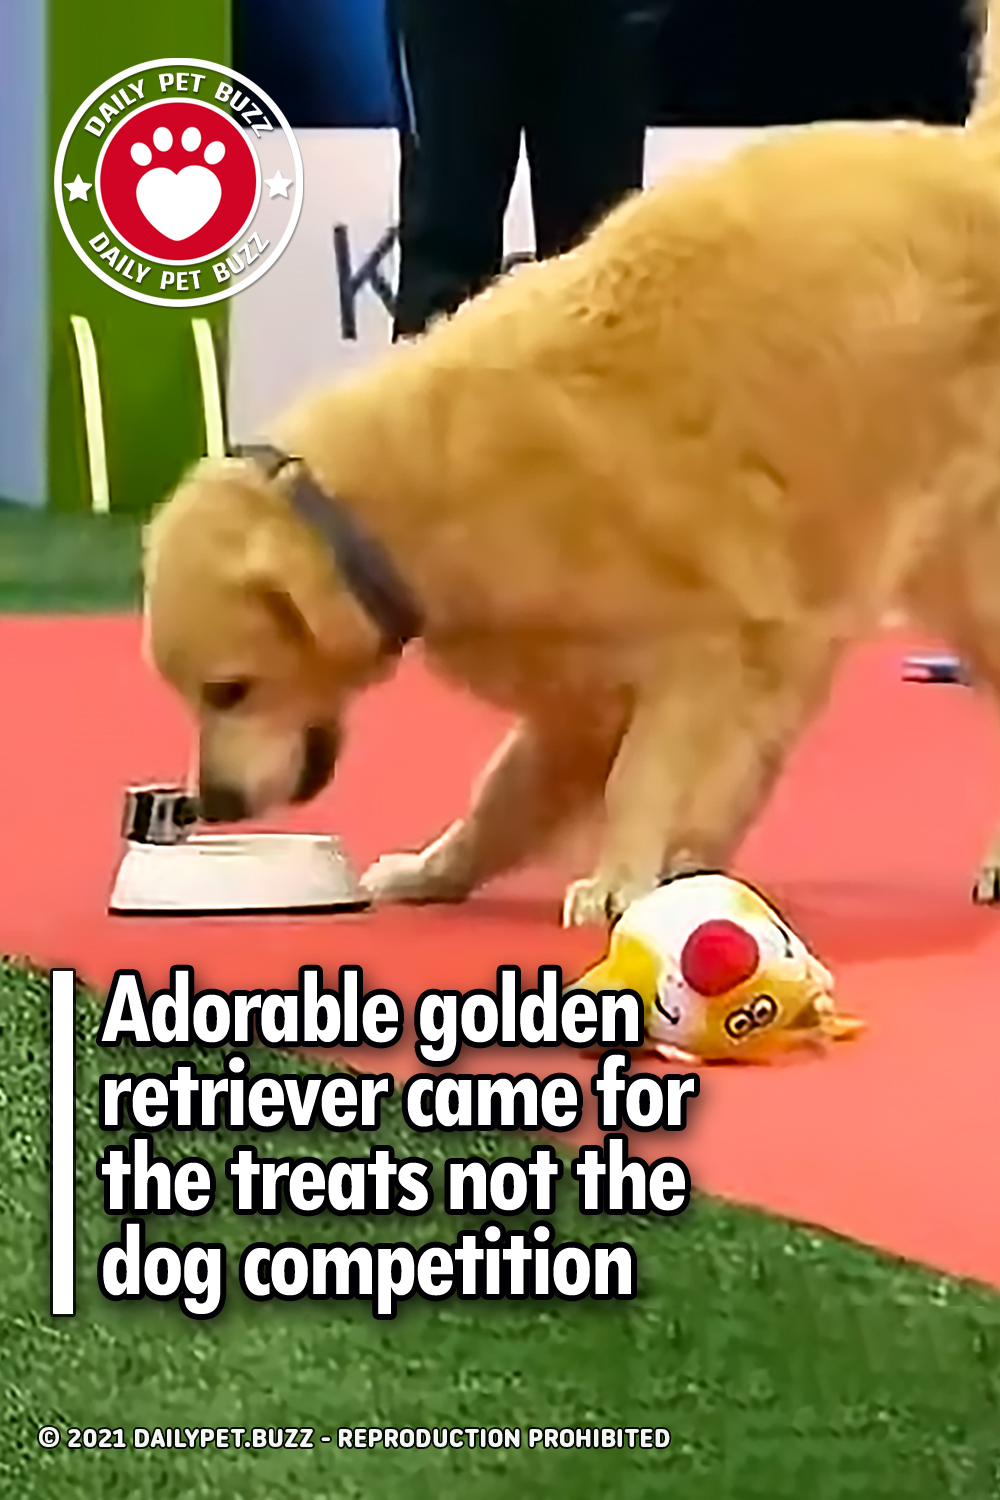 Adorable golden retriever came for the treats not the dog competition